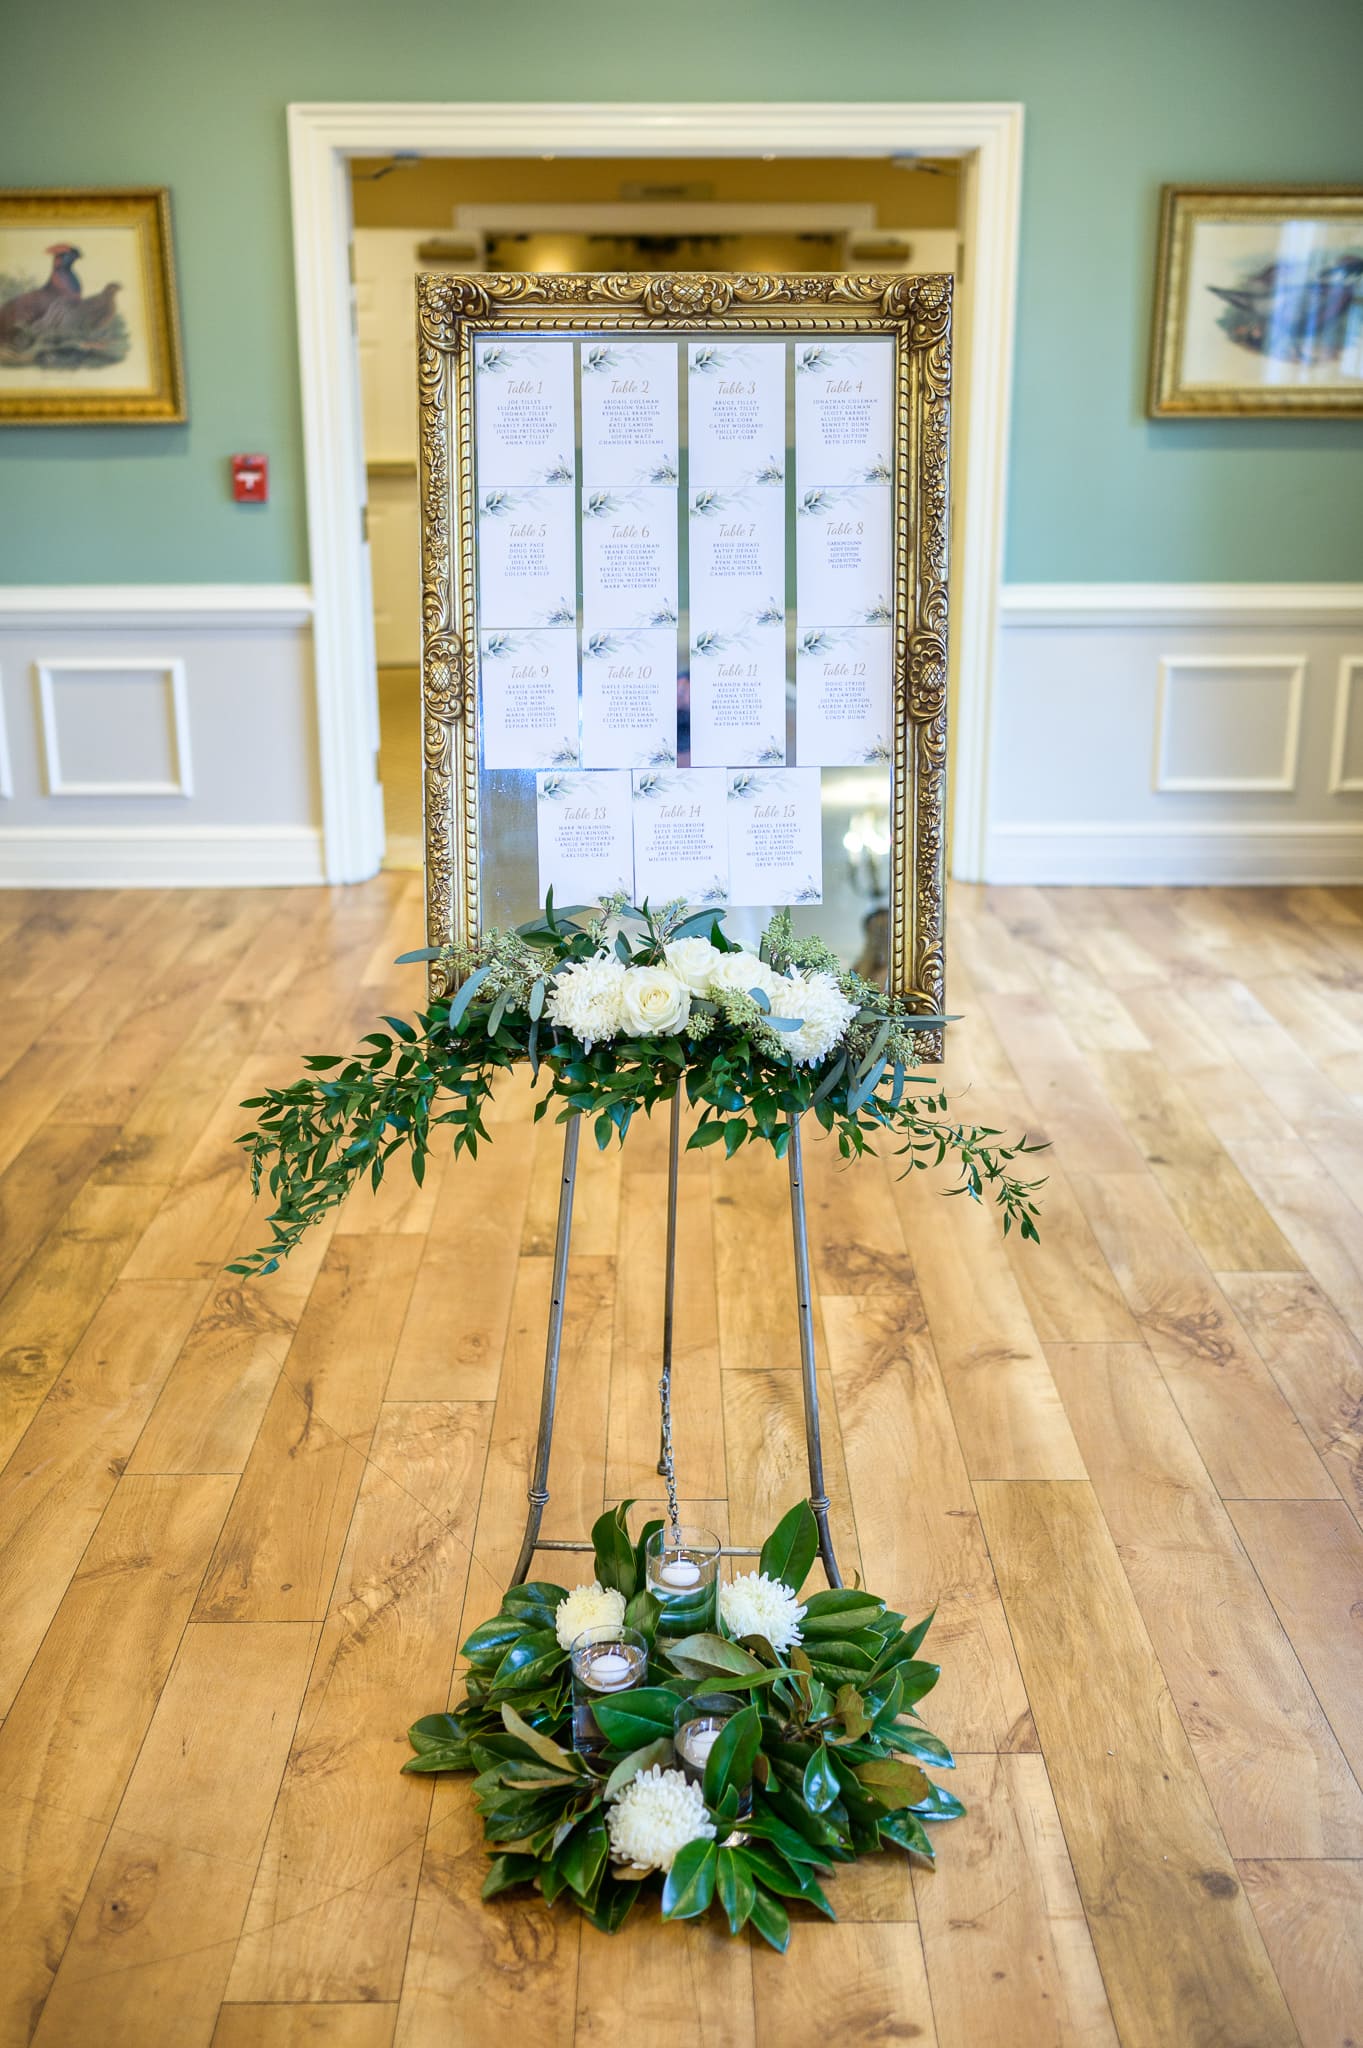 Table seating chart - Pawleys Plantation Golf & Country Club